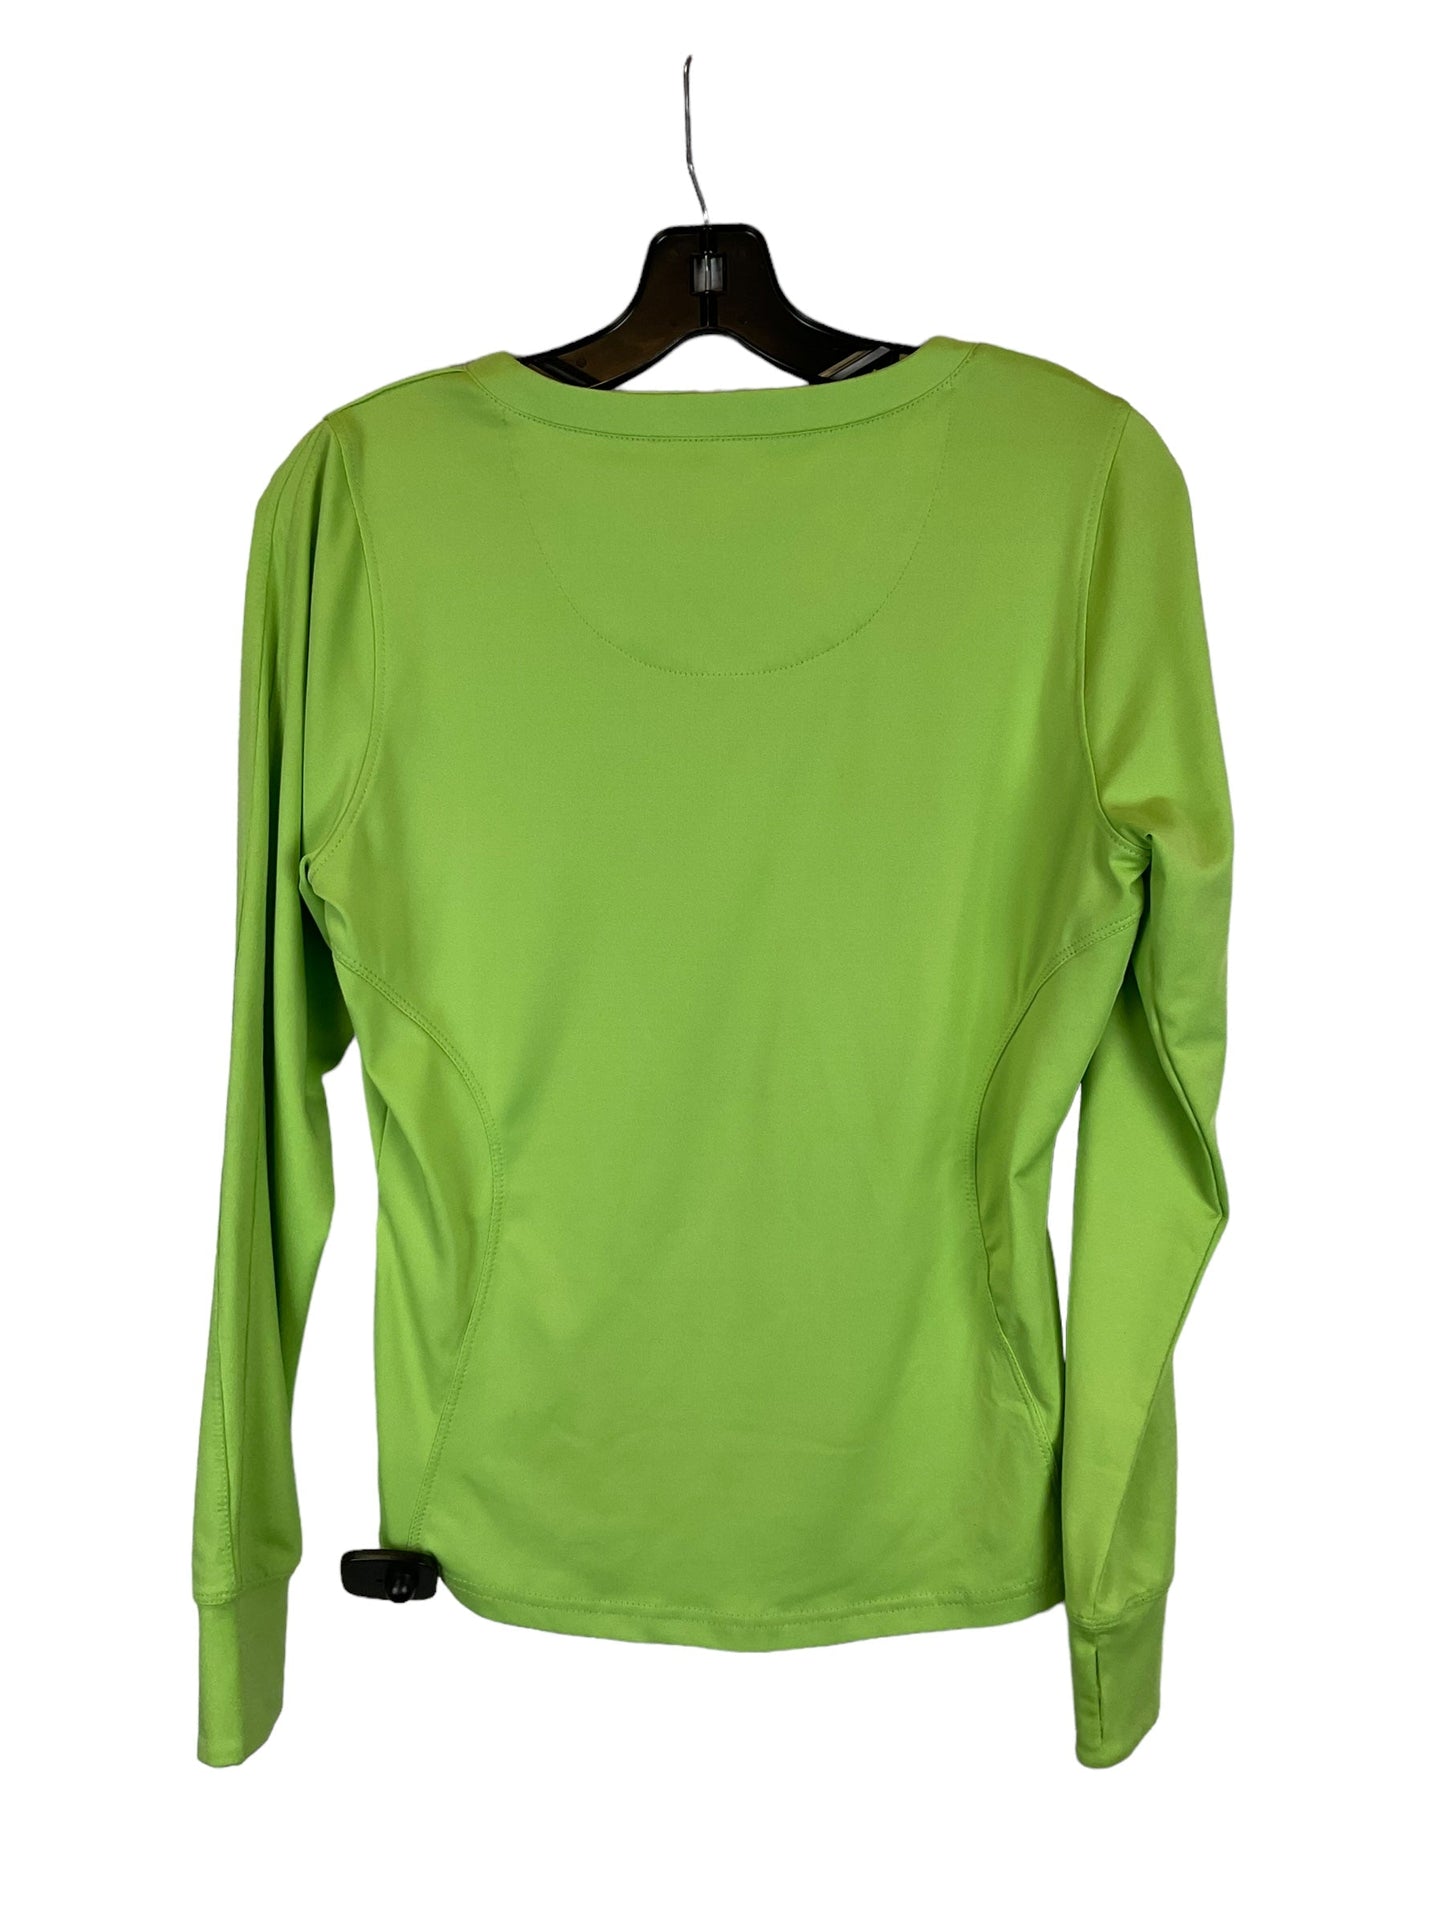 Athletic Top Long Sleeve Crewneck By Bolle  Size: M